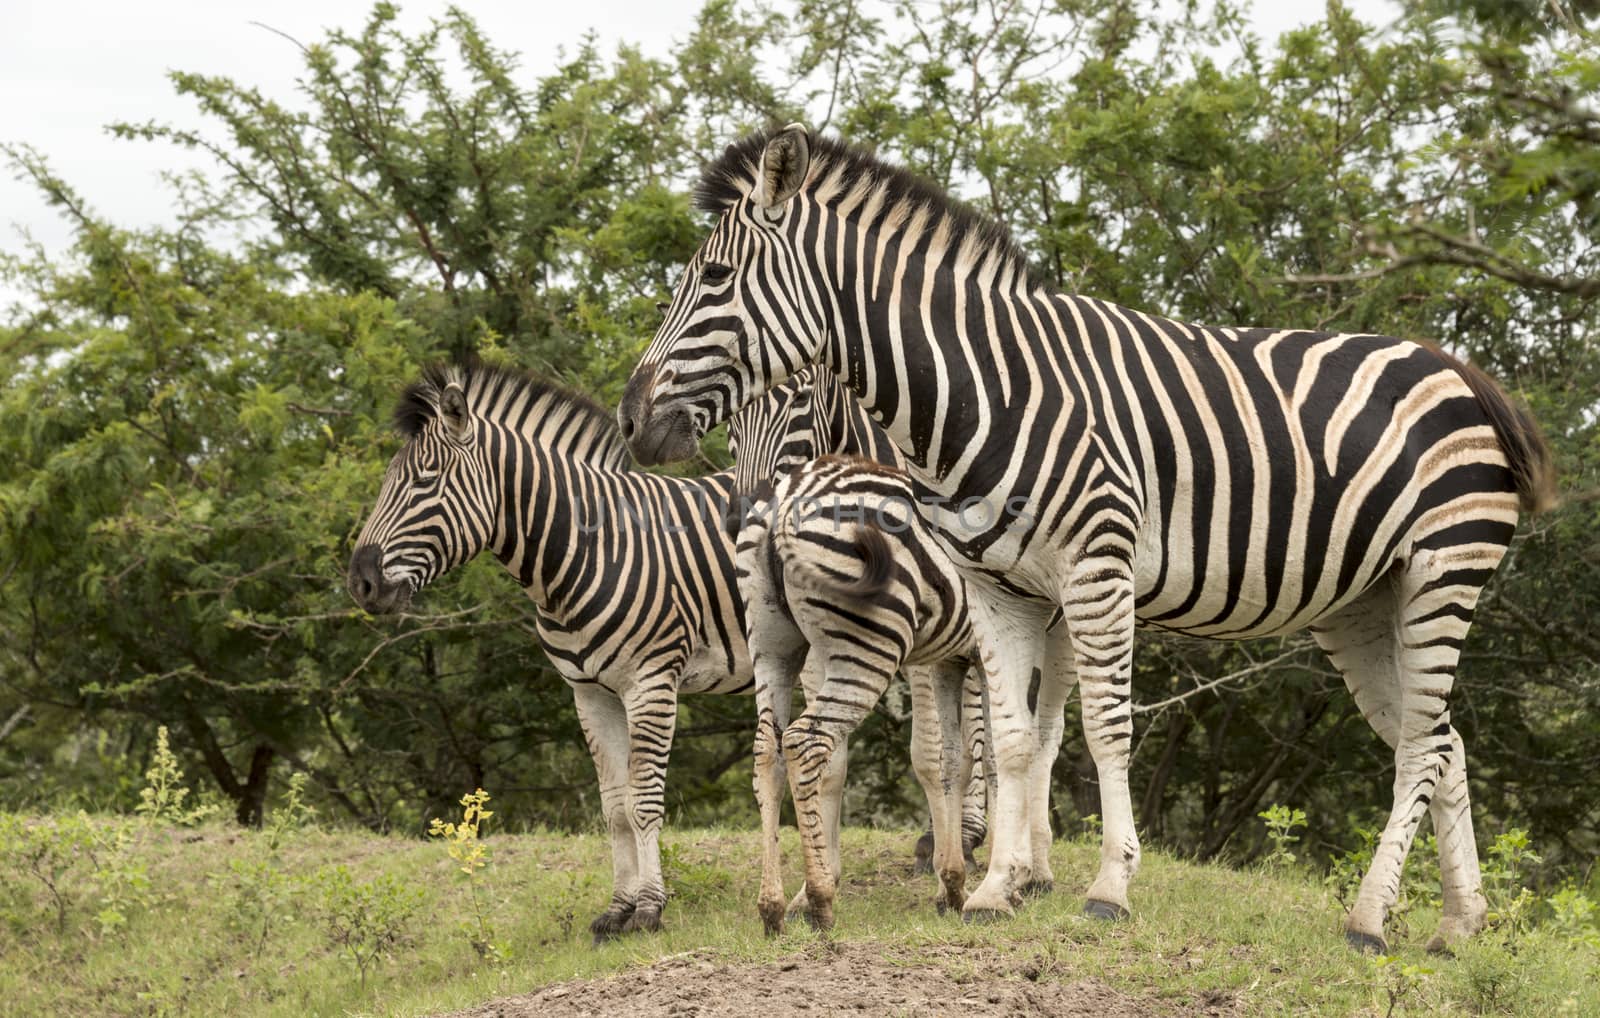 group of zebras  by compuinfoto